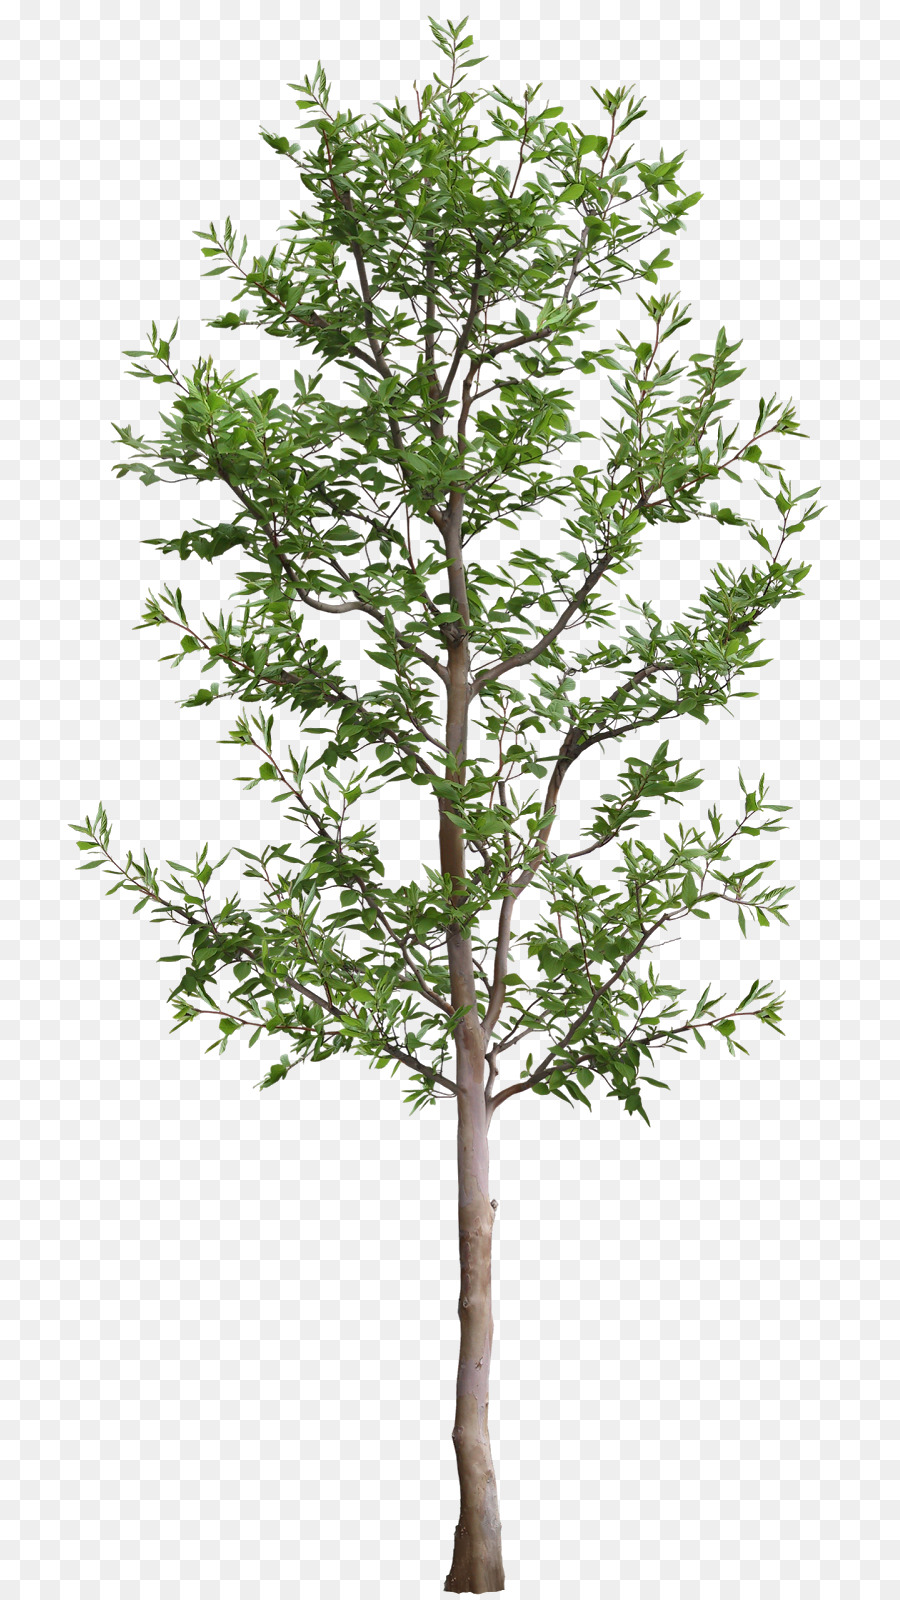 Family Tree Background clipart - Tree, transparent clip art